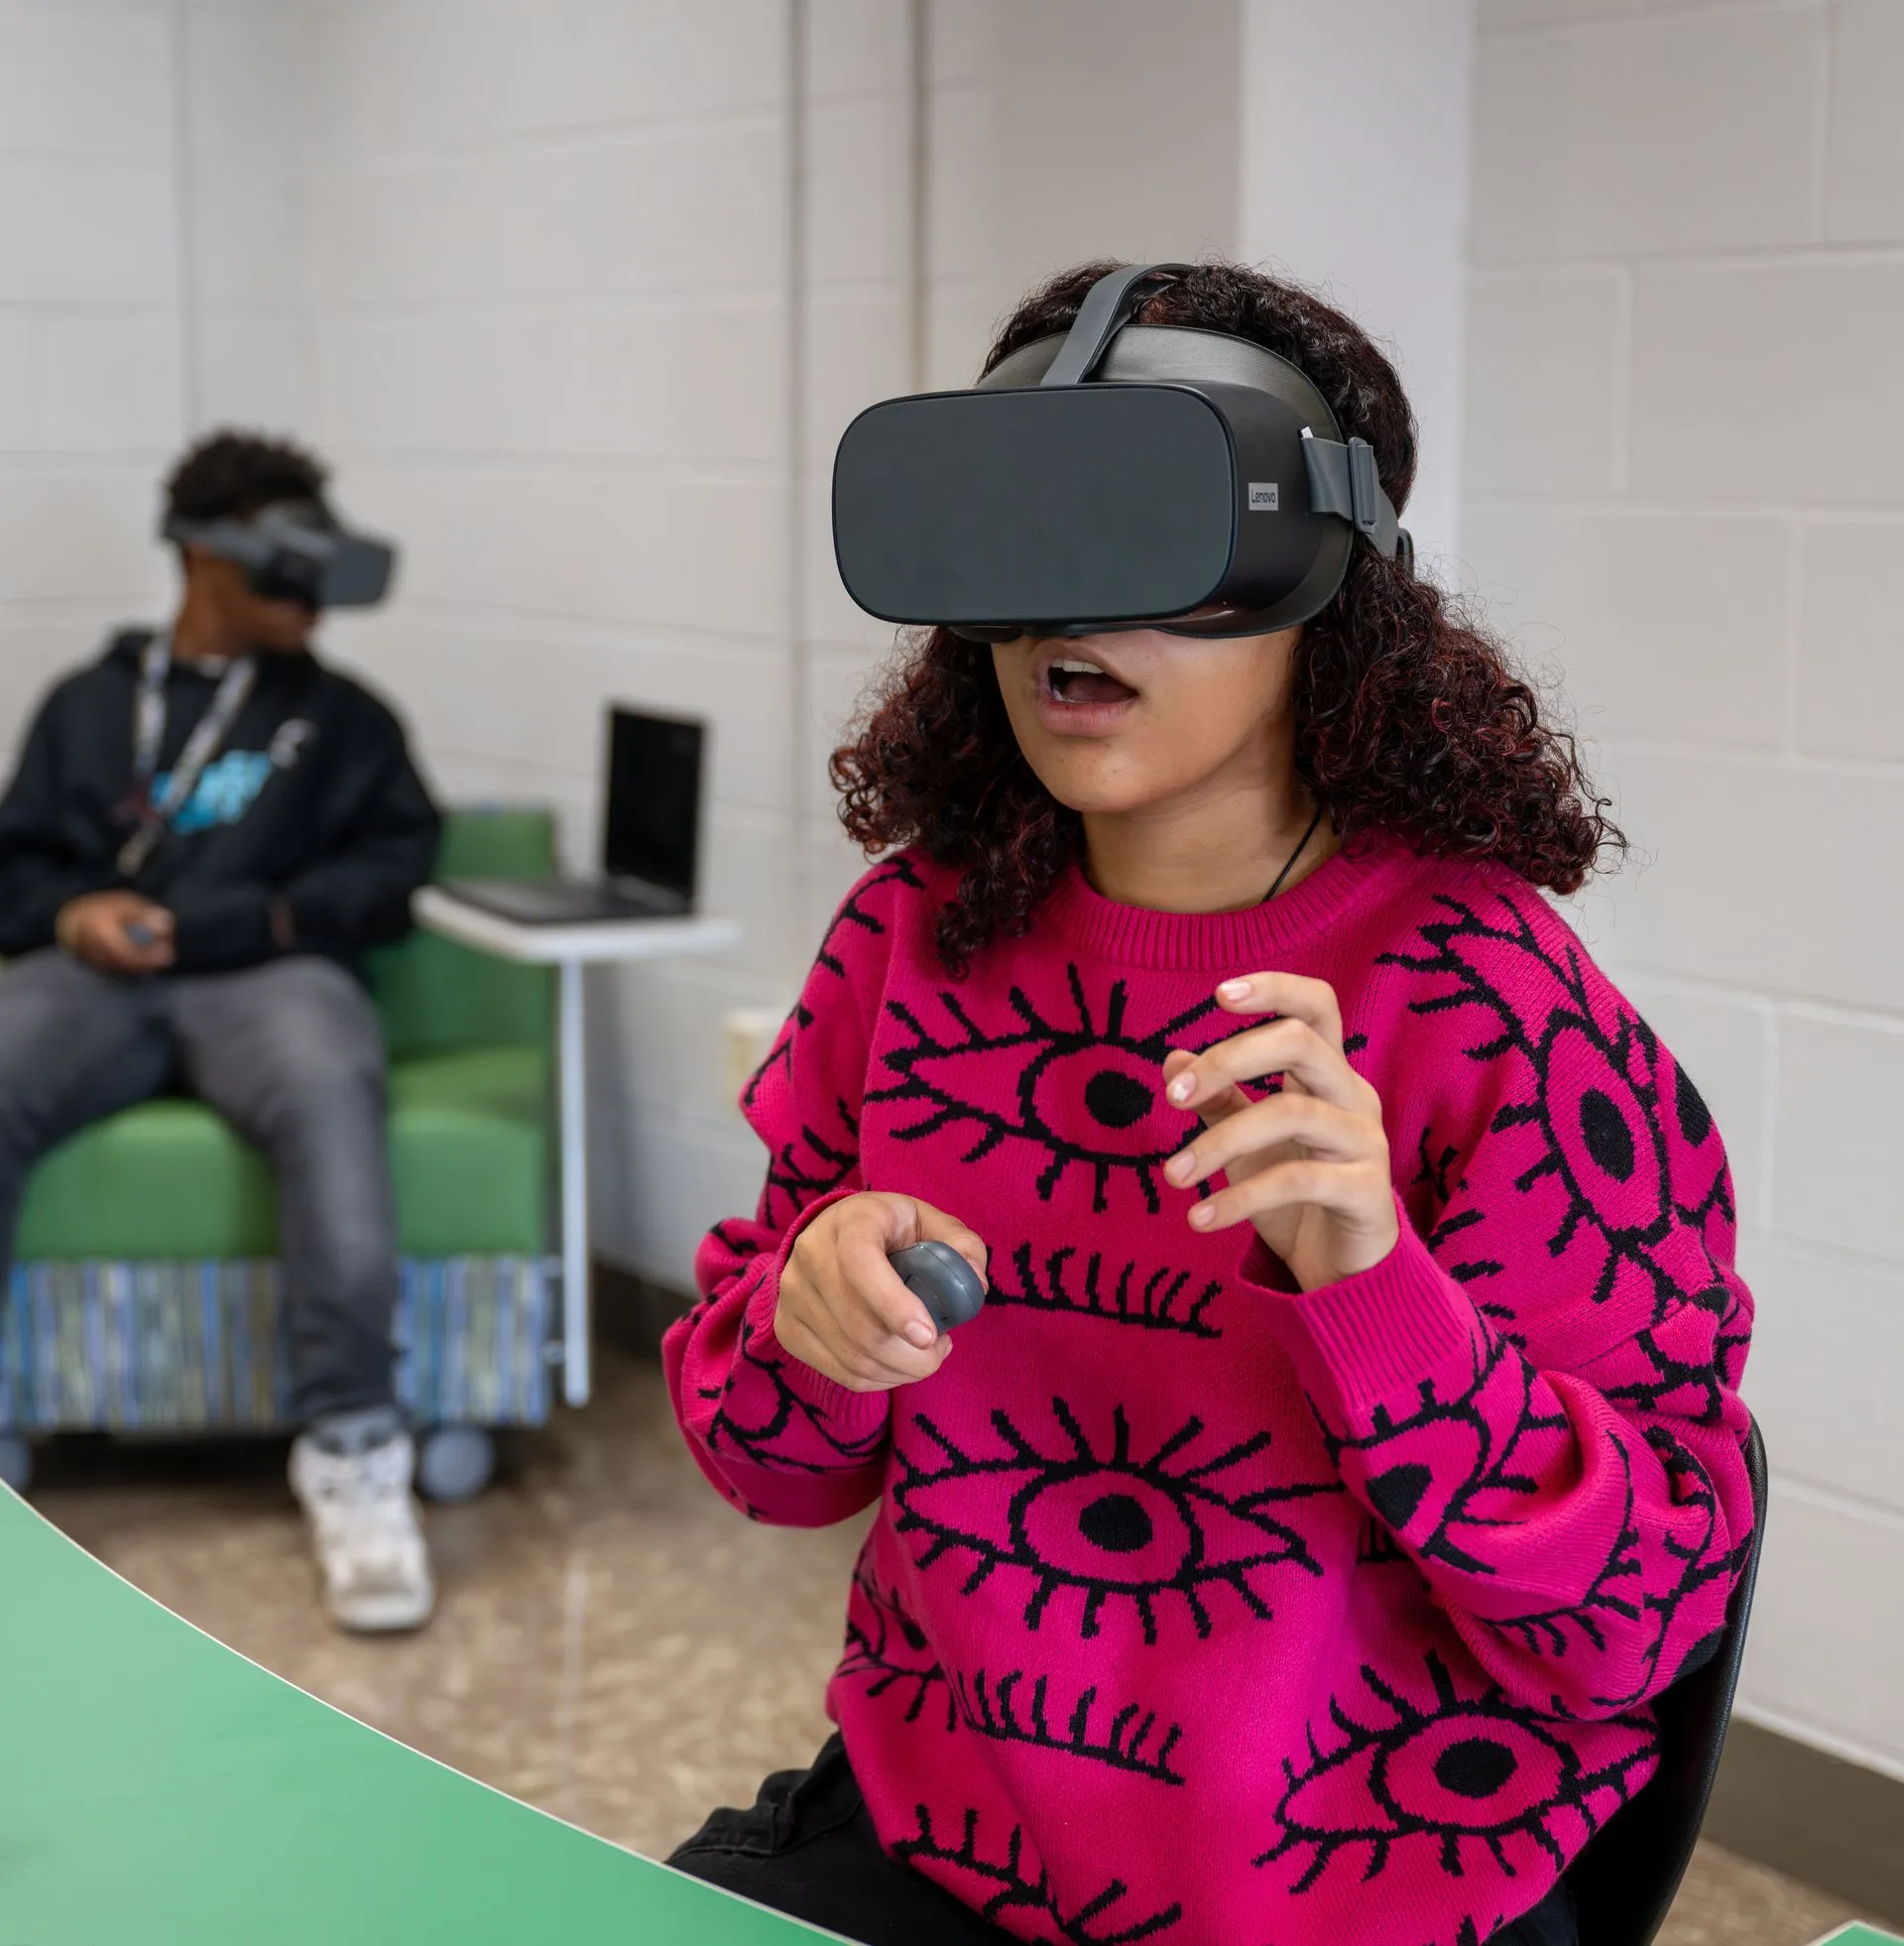 Student looking at a VR headset